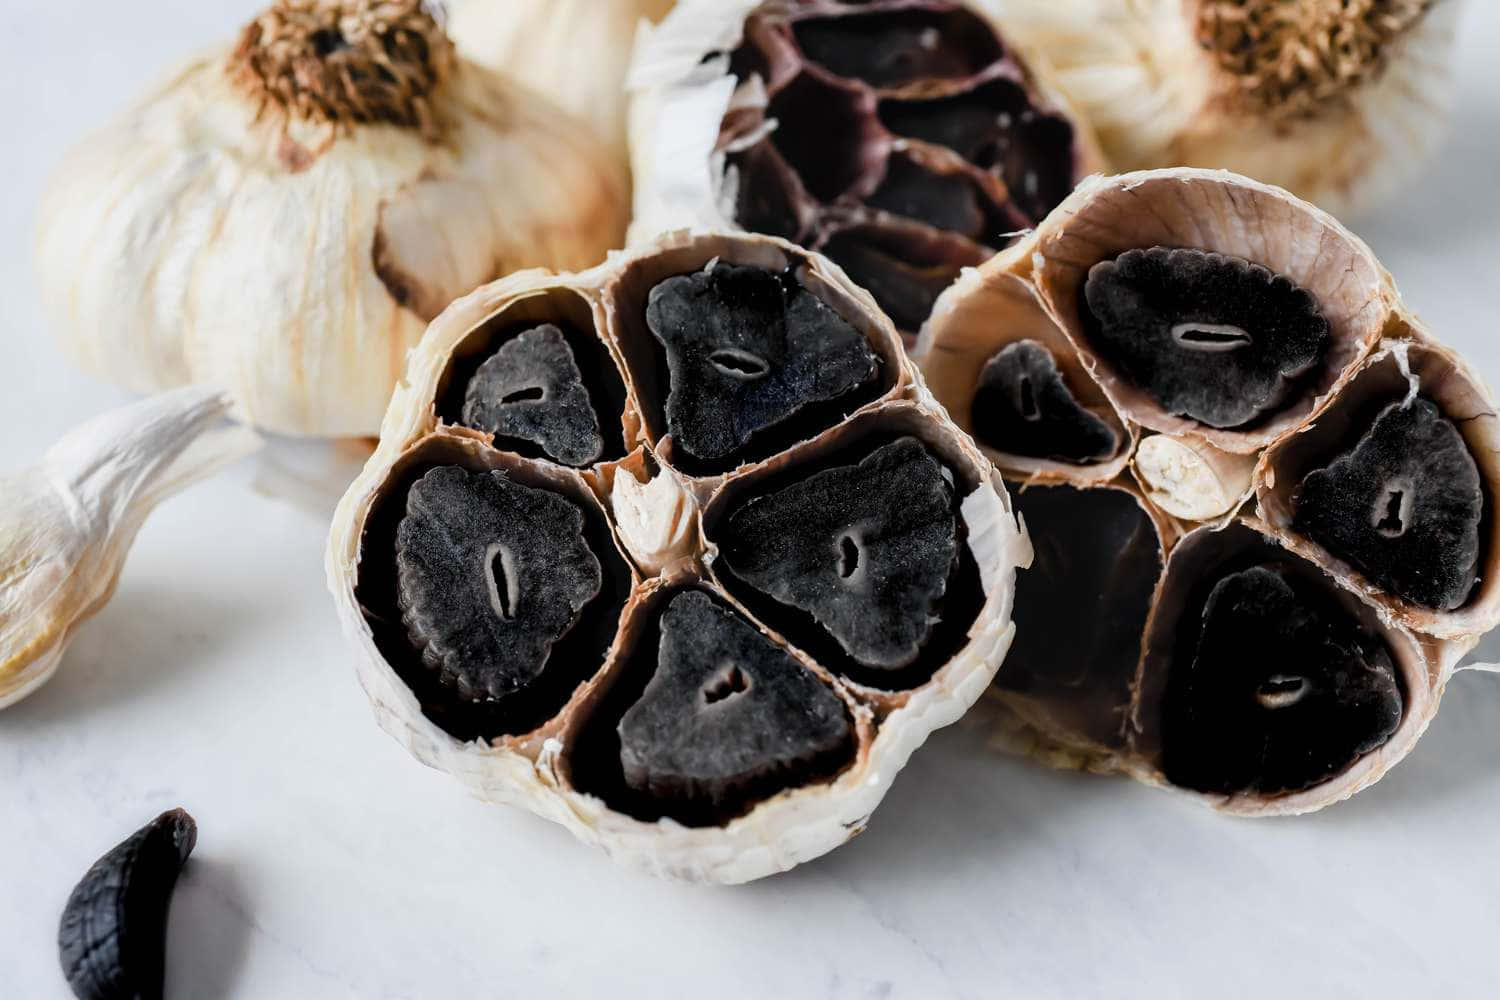 An aromatic and flavorful side of Black Garlic Wallpaper